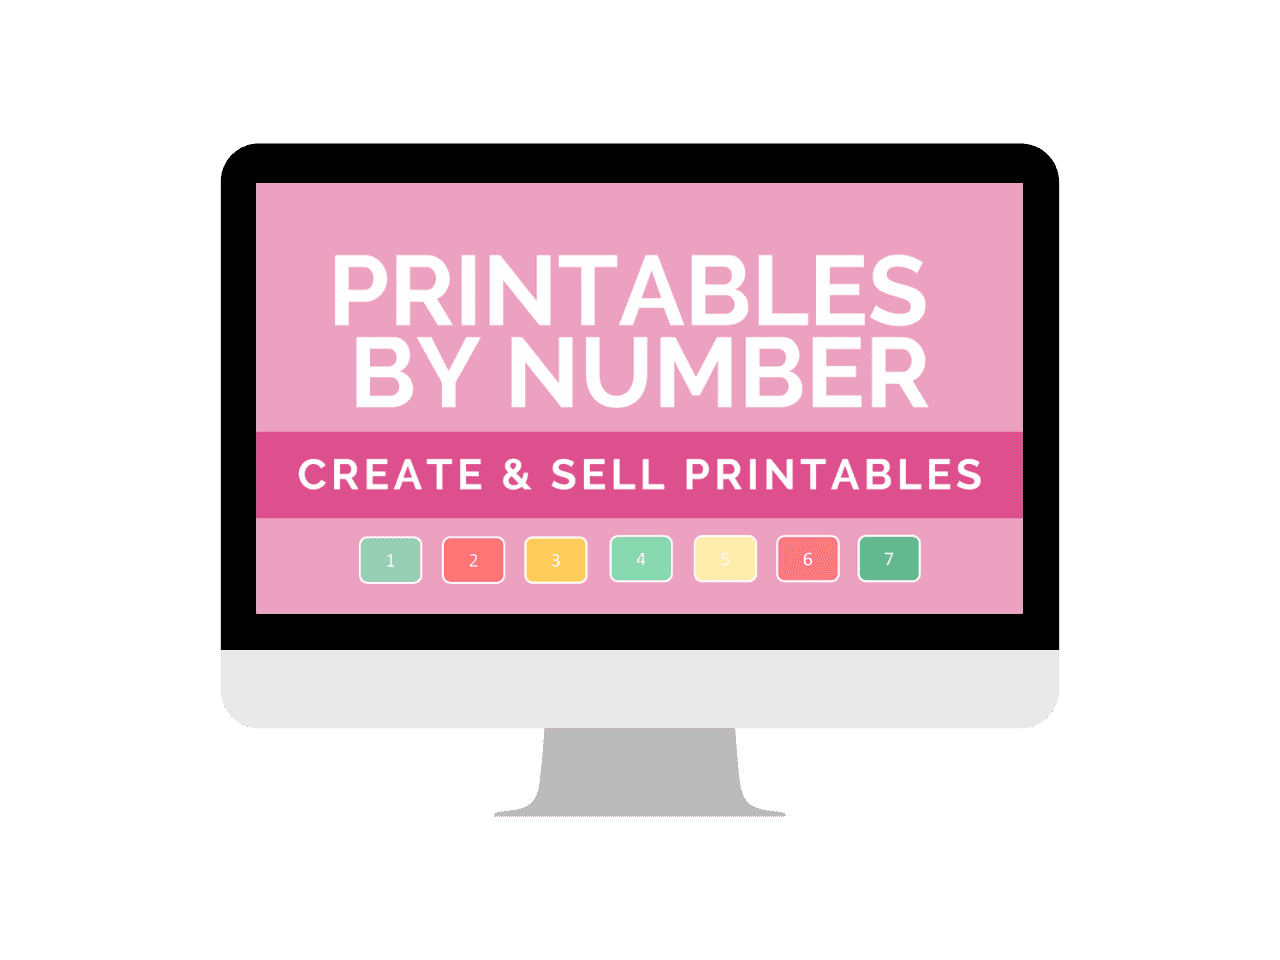 Printables By Number Course Graphic